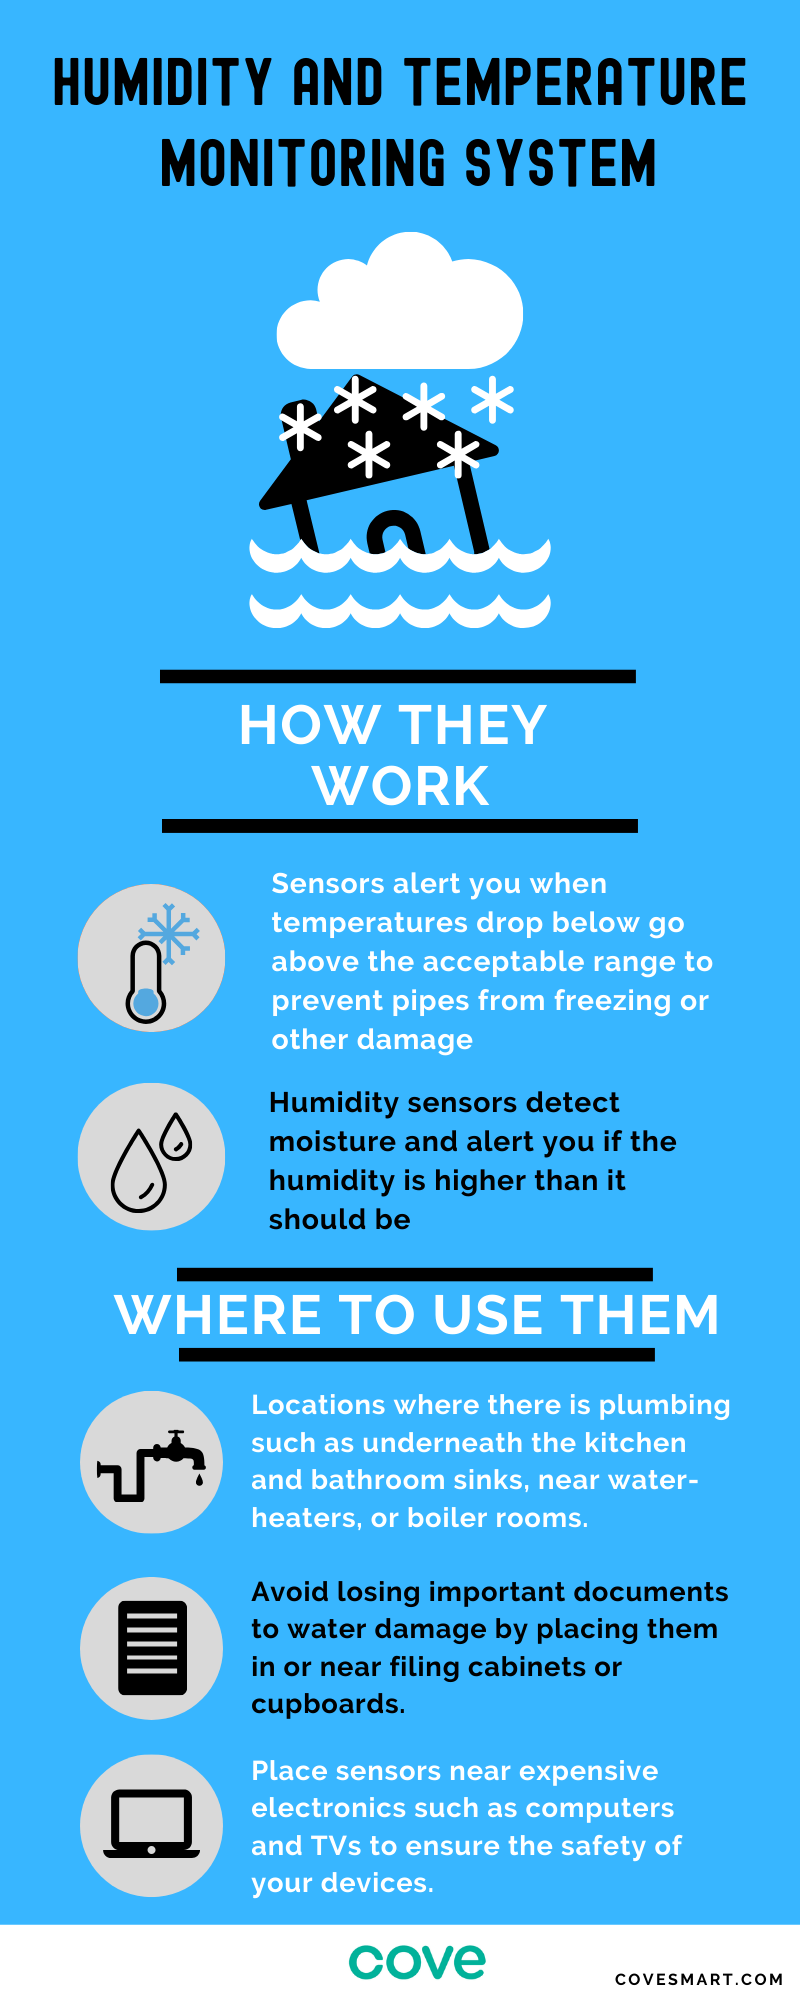 https://www.datocms-assets.com/10154/1584567170-humidity-and-temperature-monitoring-system.png?auto=format&ixlib=react-9.8.0